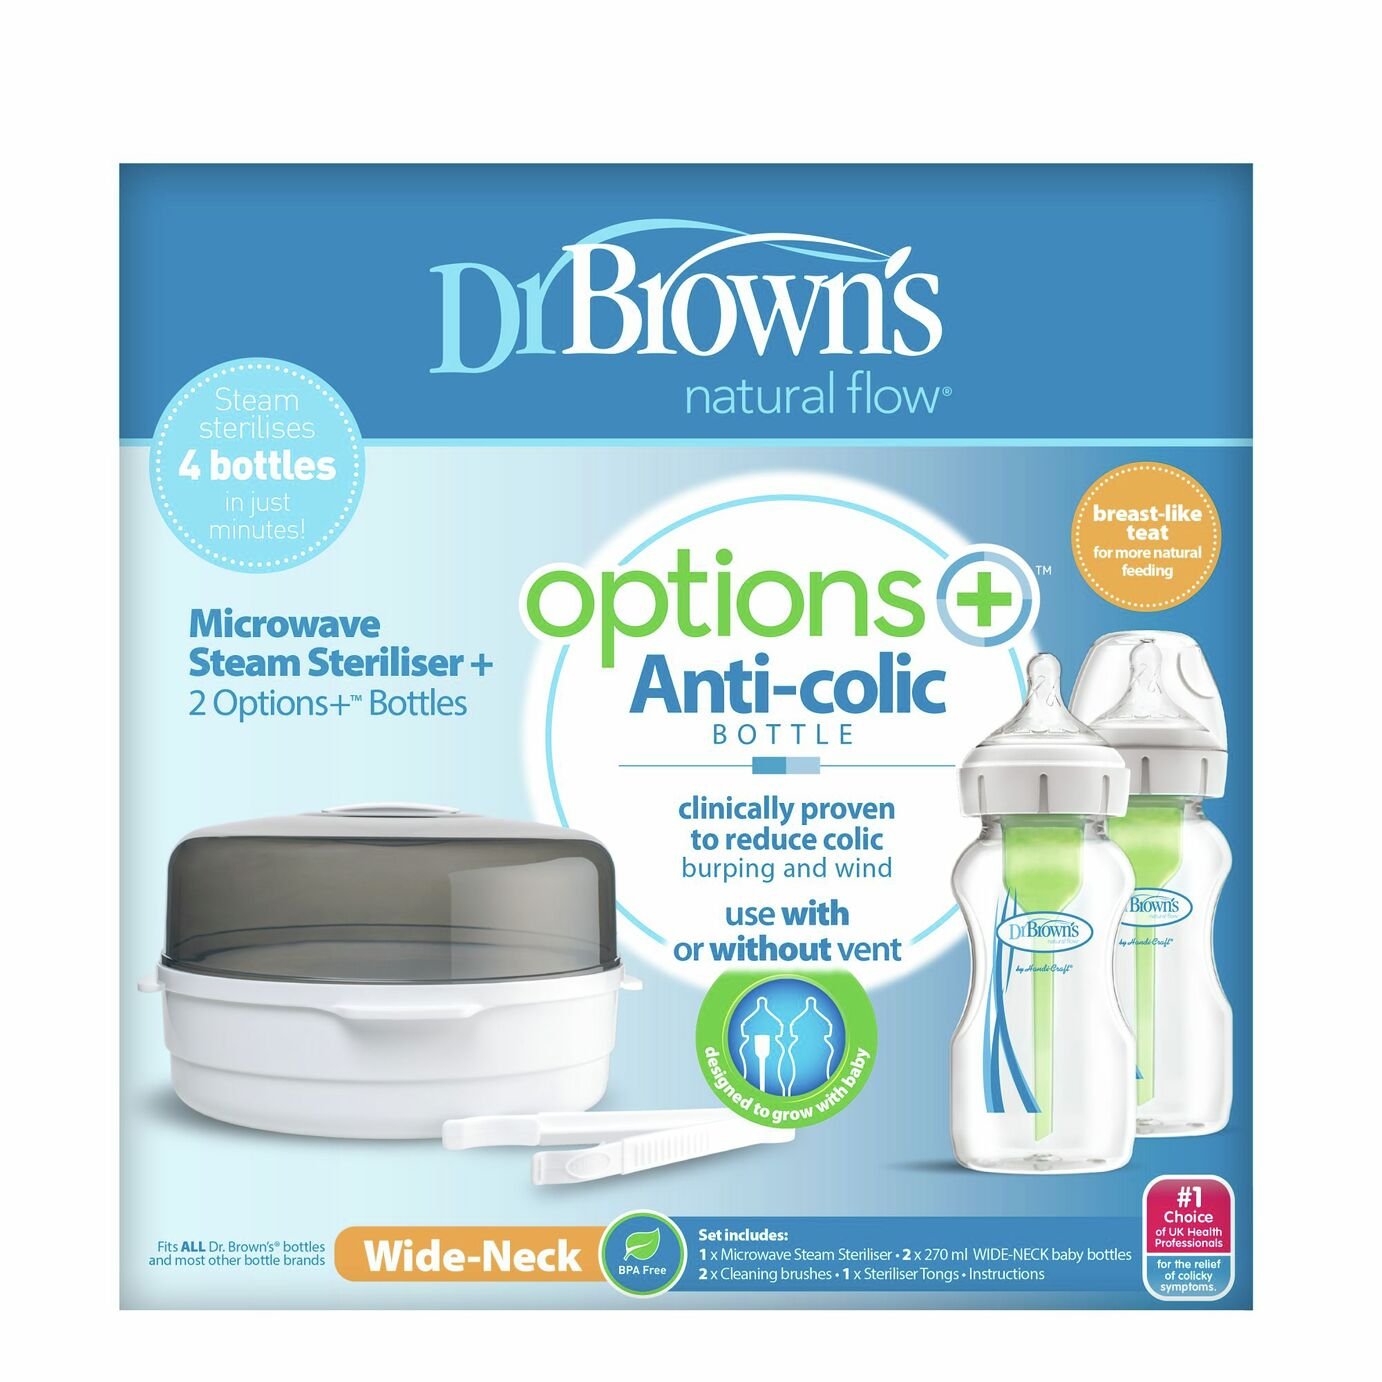 Dr Brown's Options+ Microwave Steriliser and Baby Bottle Set Review